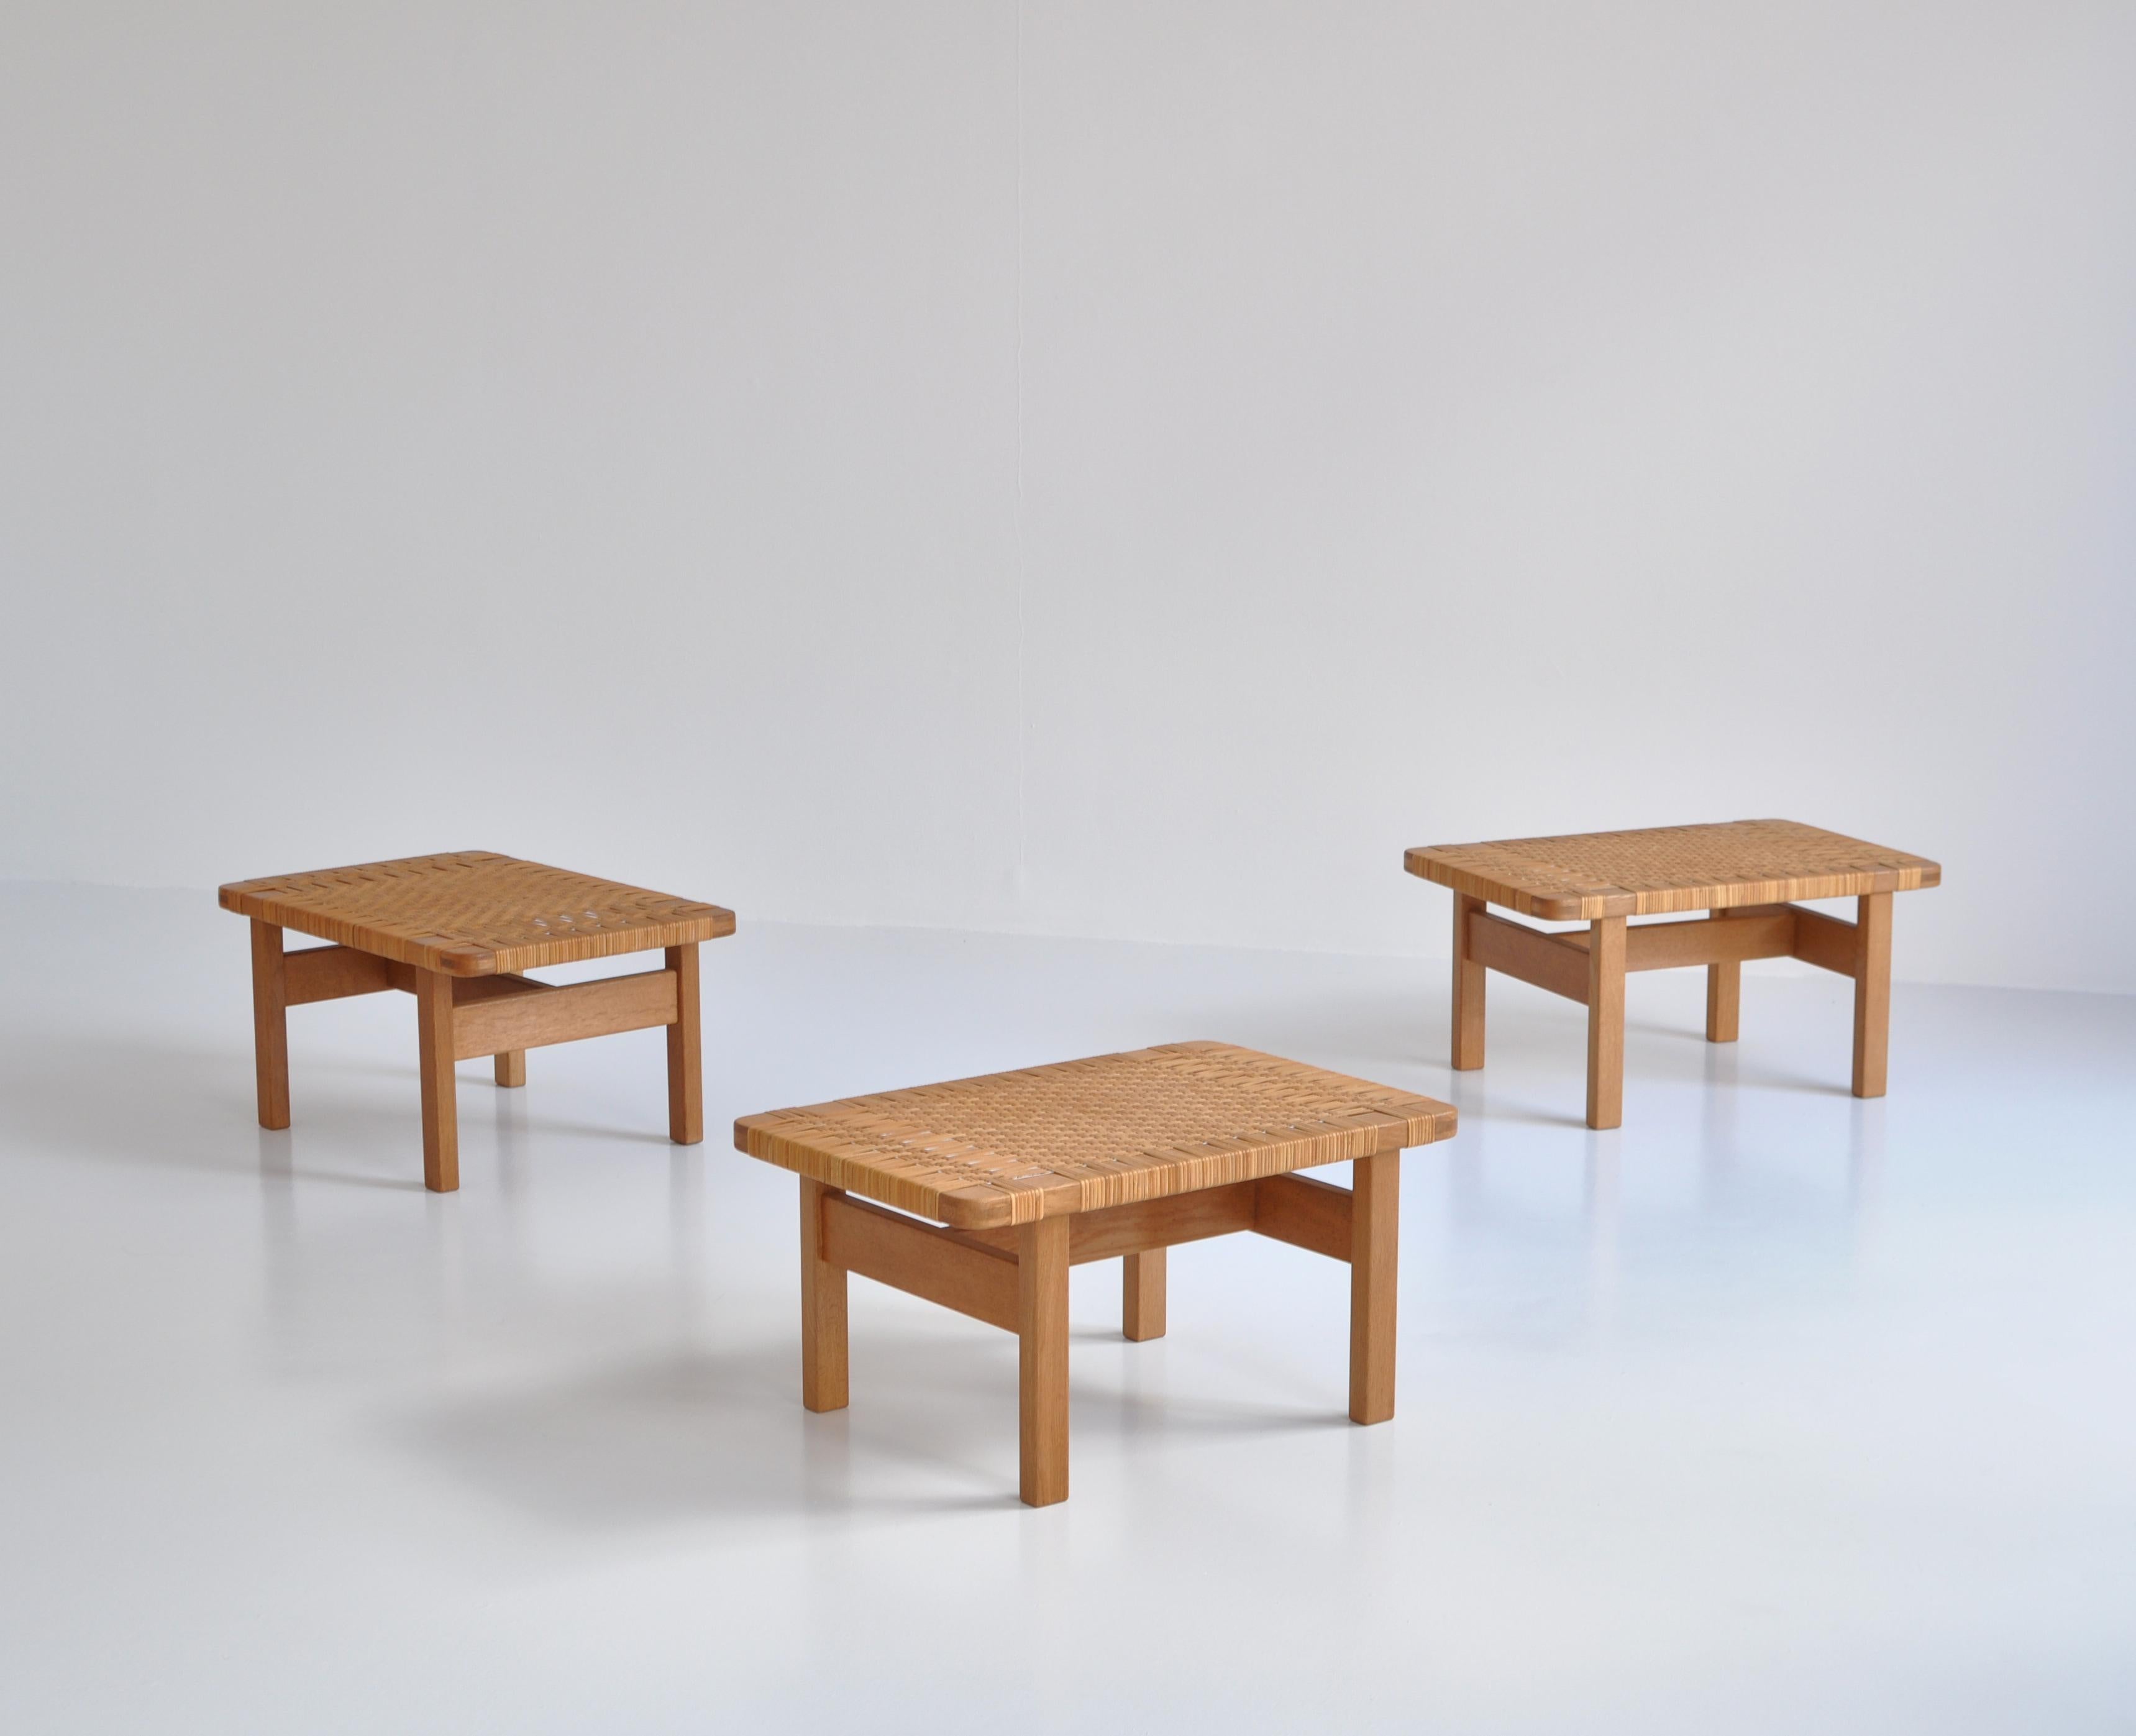 Danish Borge Mogensen Side Tables or Benches in Oak and Rattan Cane, 1950s, Denmark